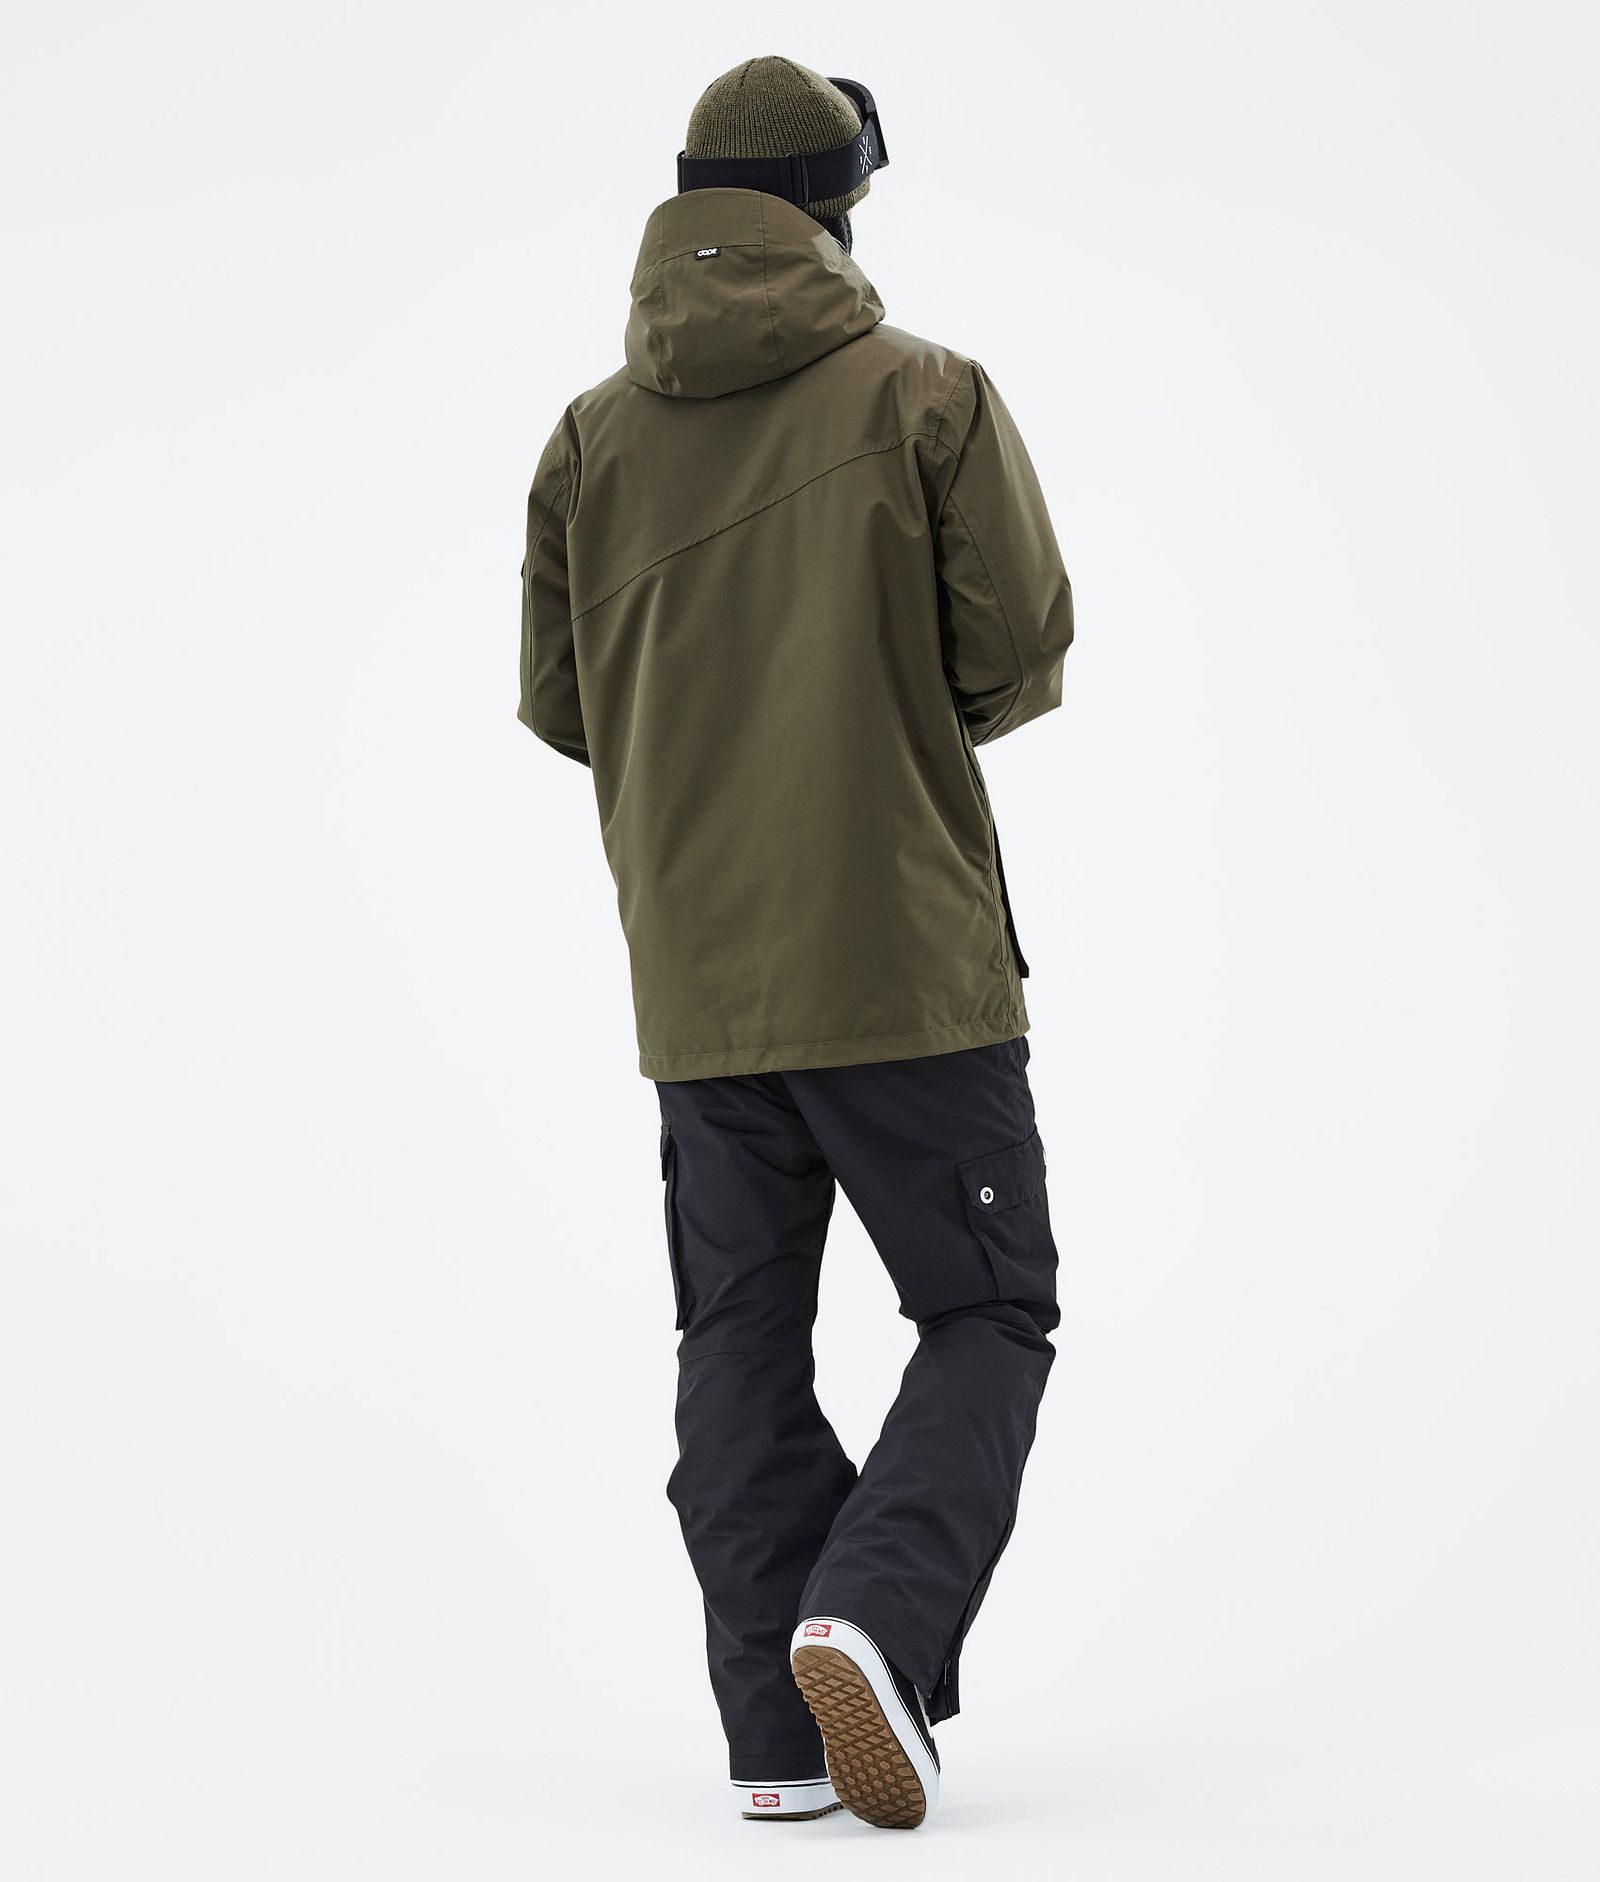 Dope Adept Giacca Snowboard Uomo Olive Green